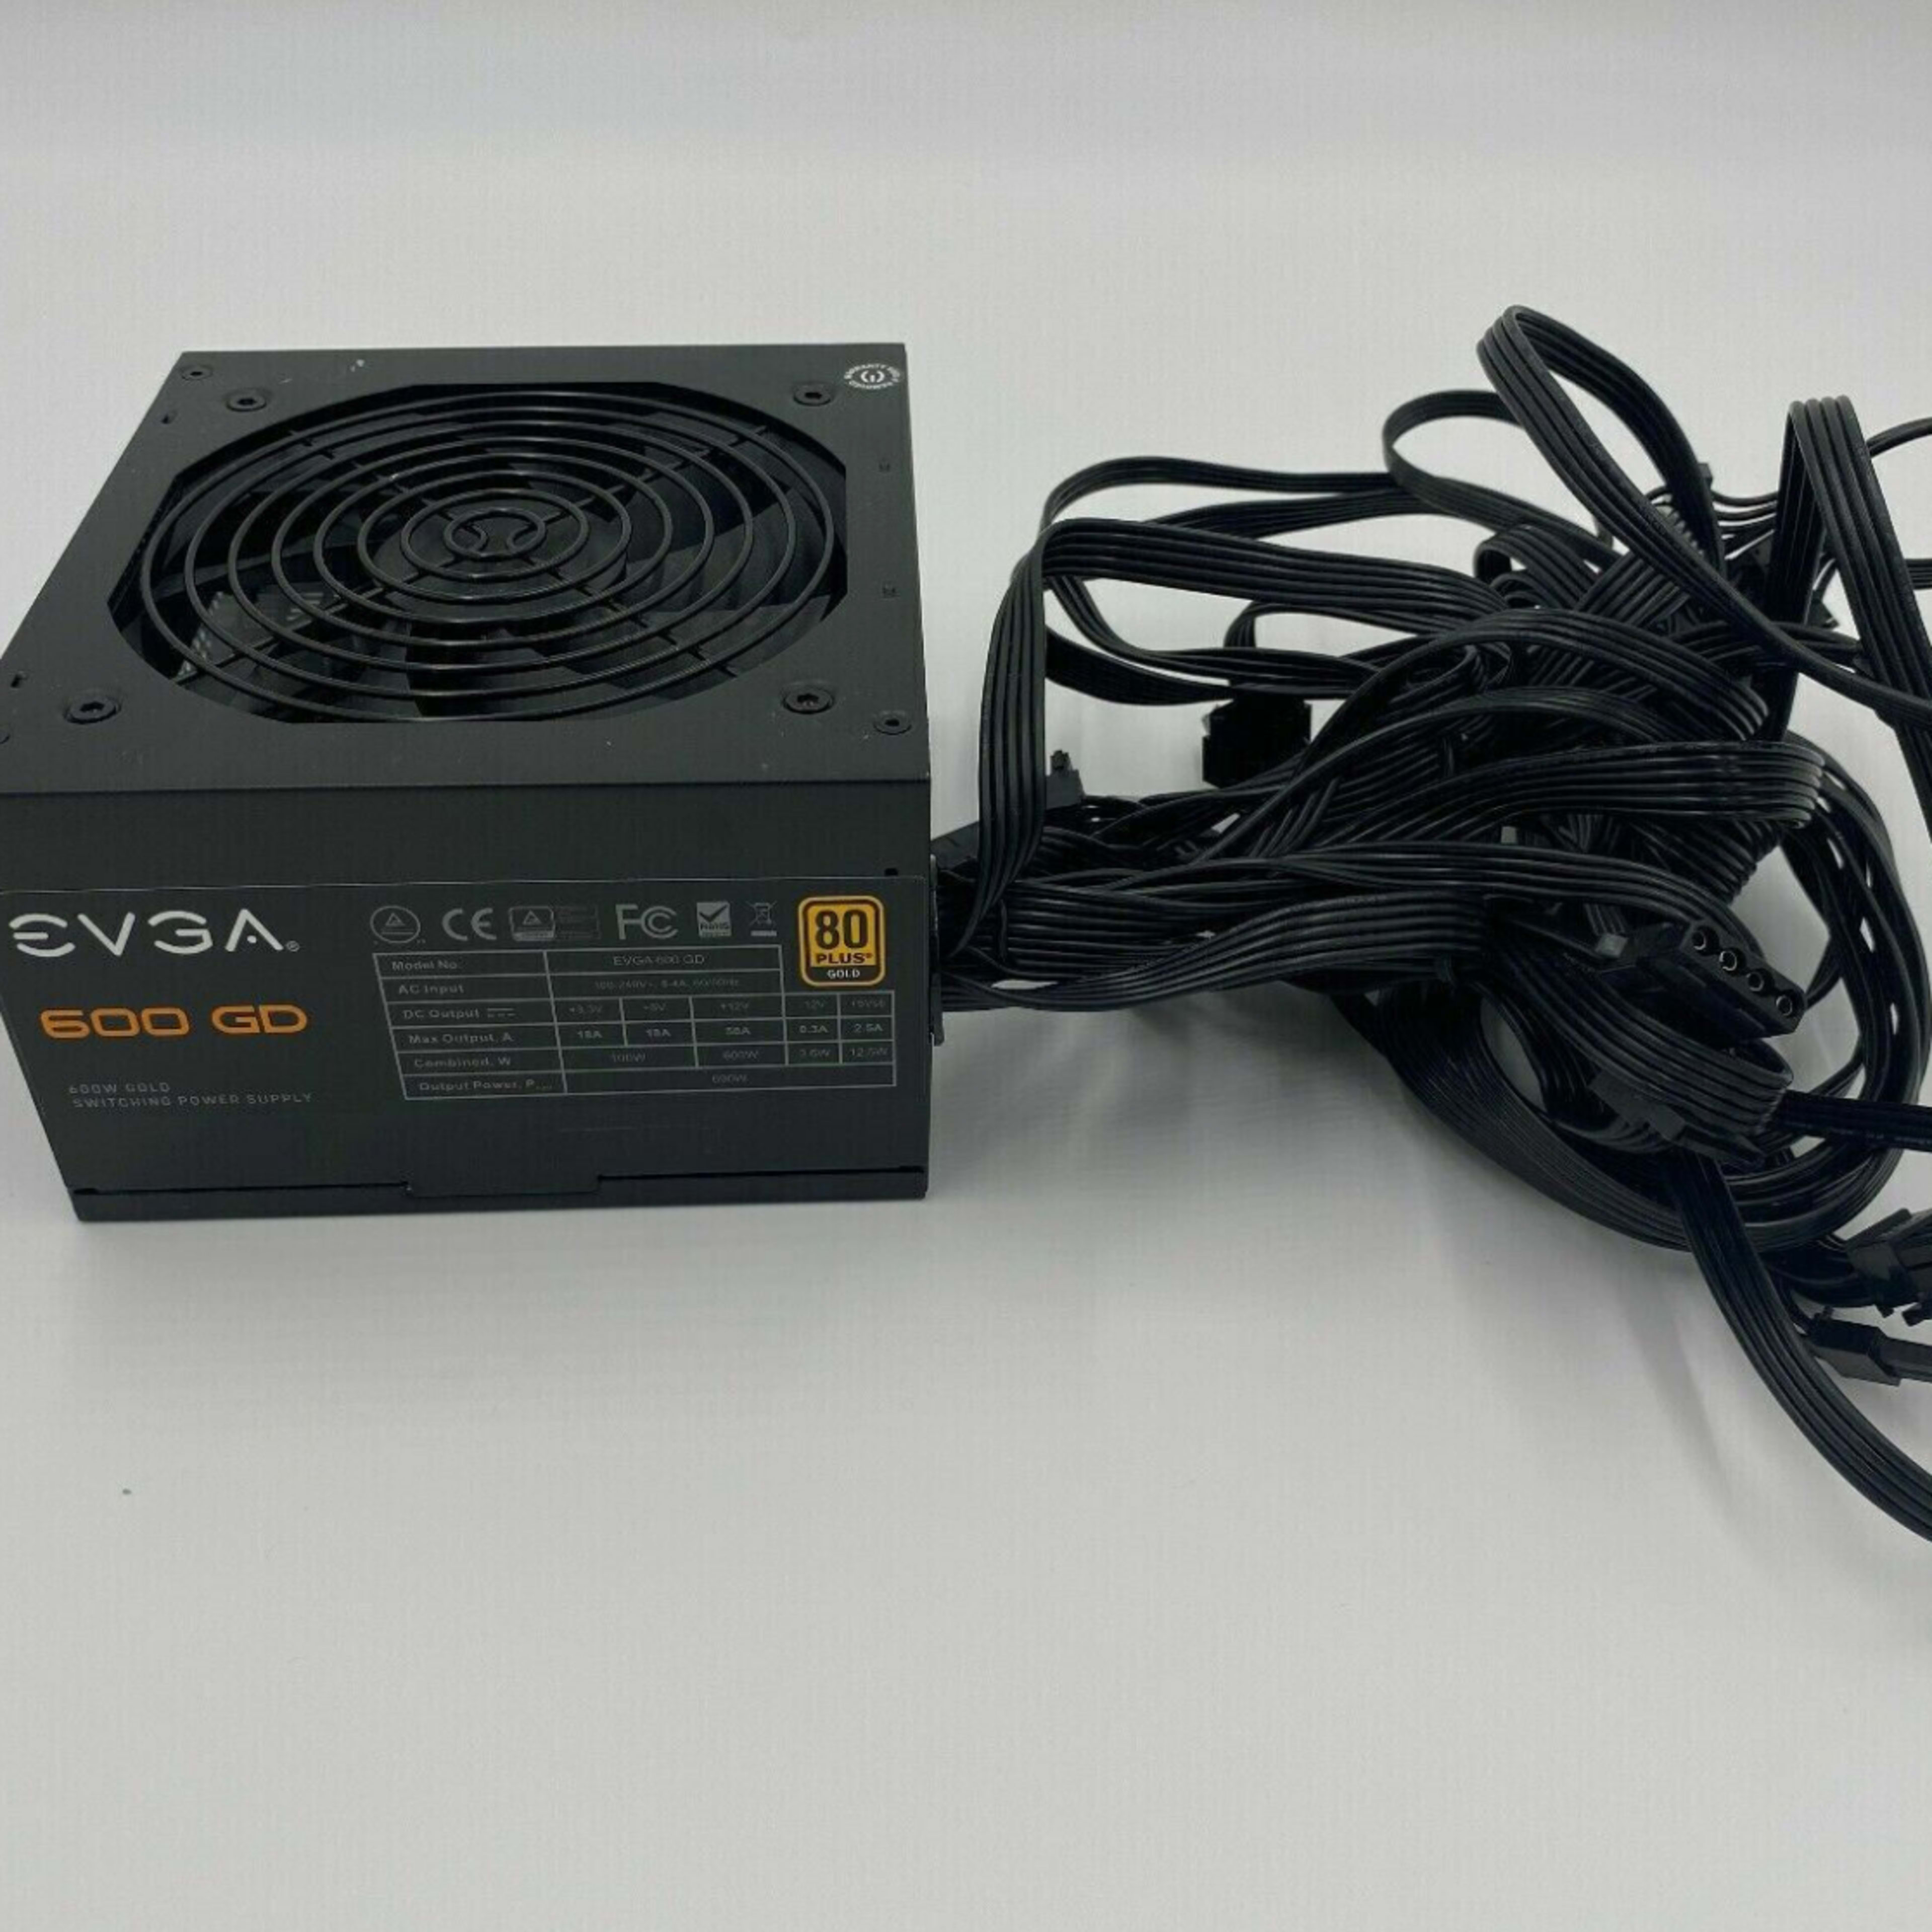 EVGA 600 GD 600W Gold Switching Power Supply 100-GD-0600-B1